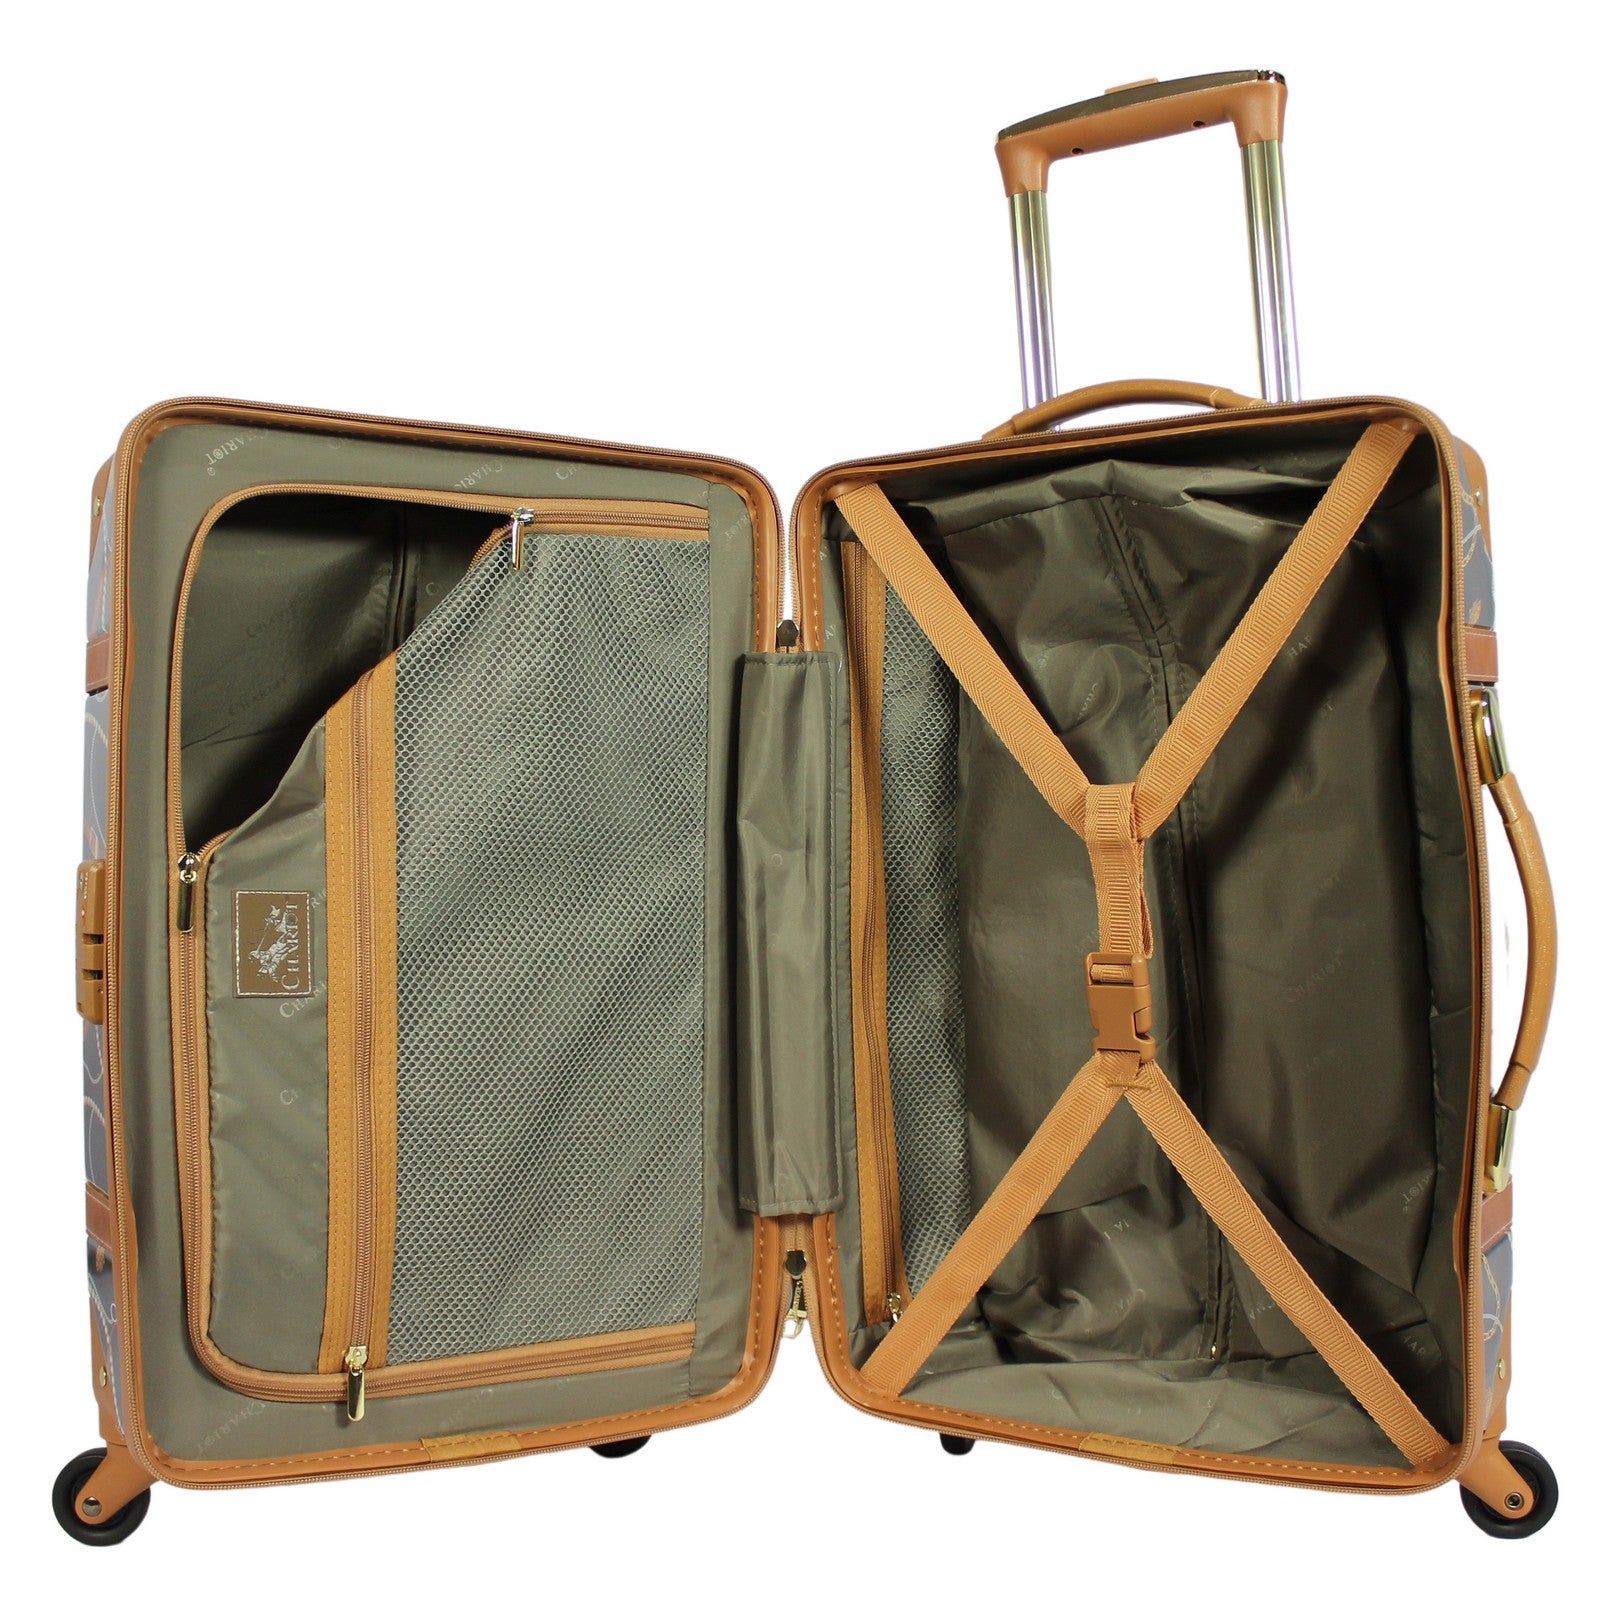 Chariot Regal 2-Piece Hardside Carry-On Spinner Luggage Set